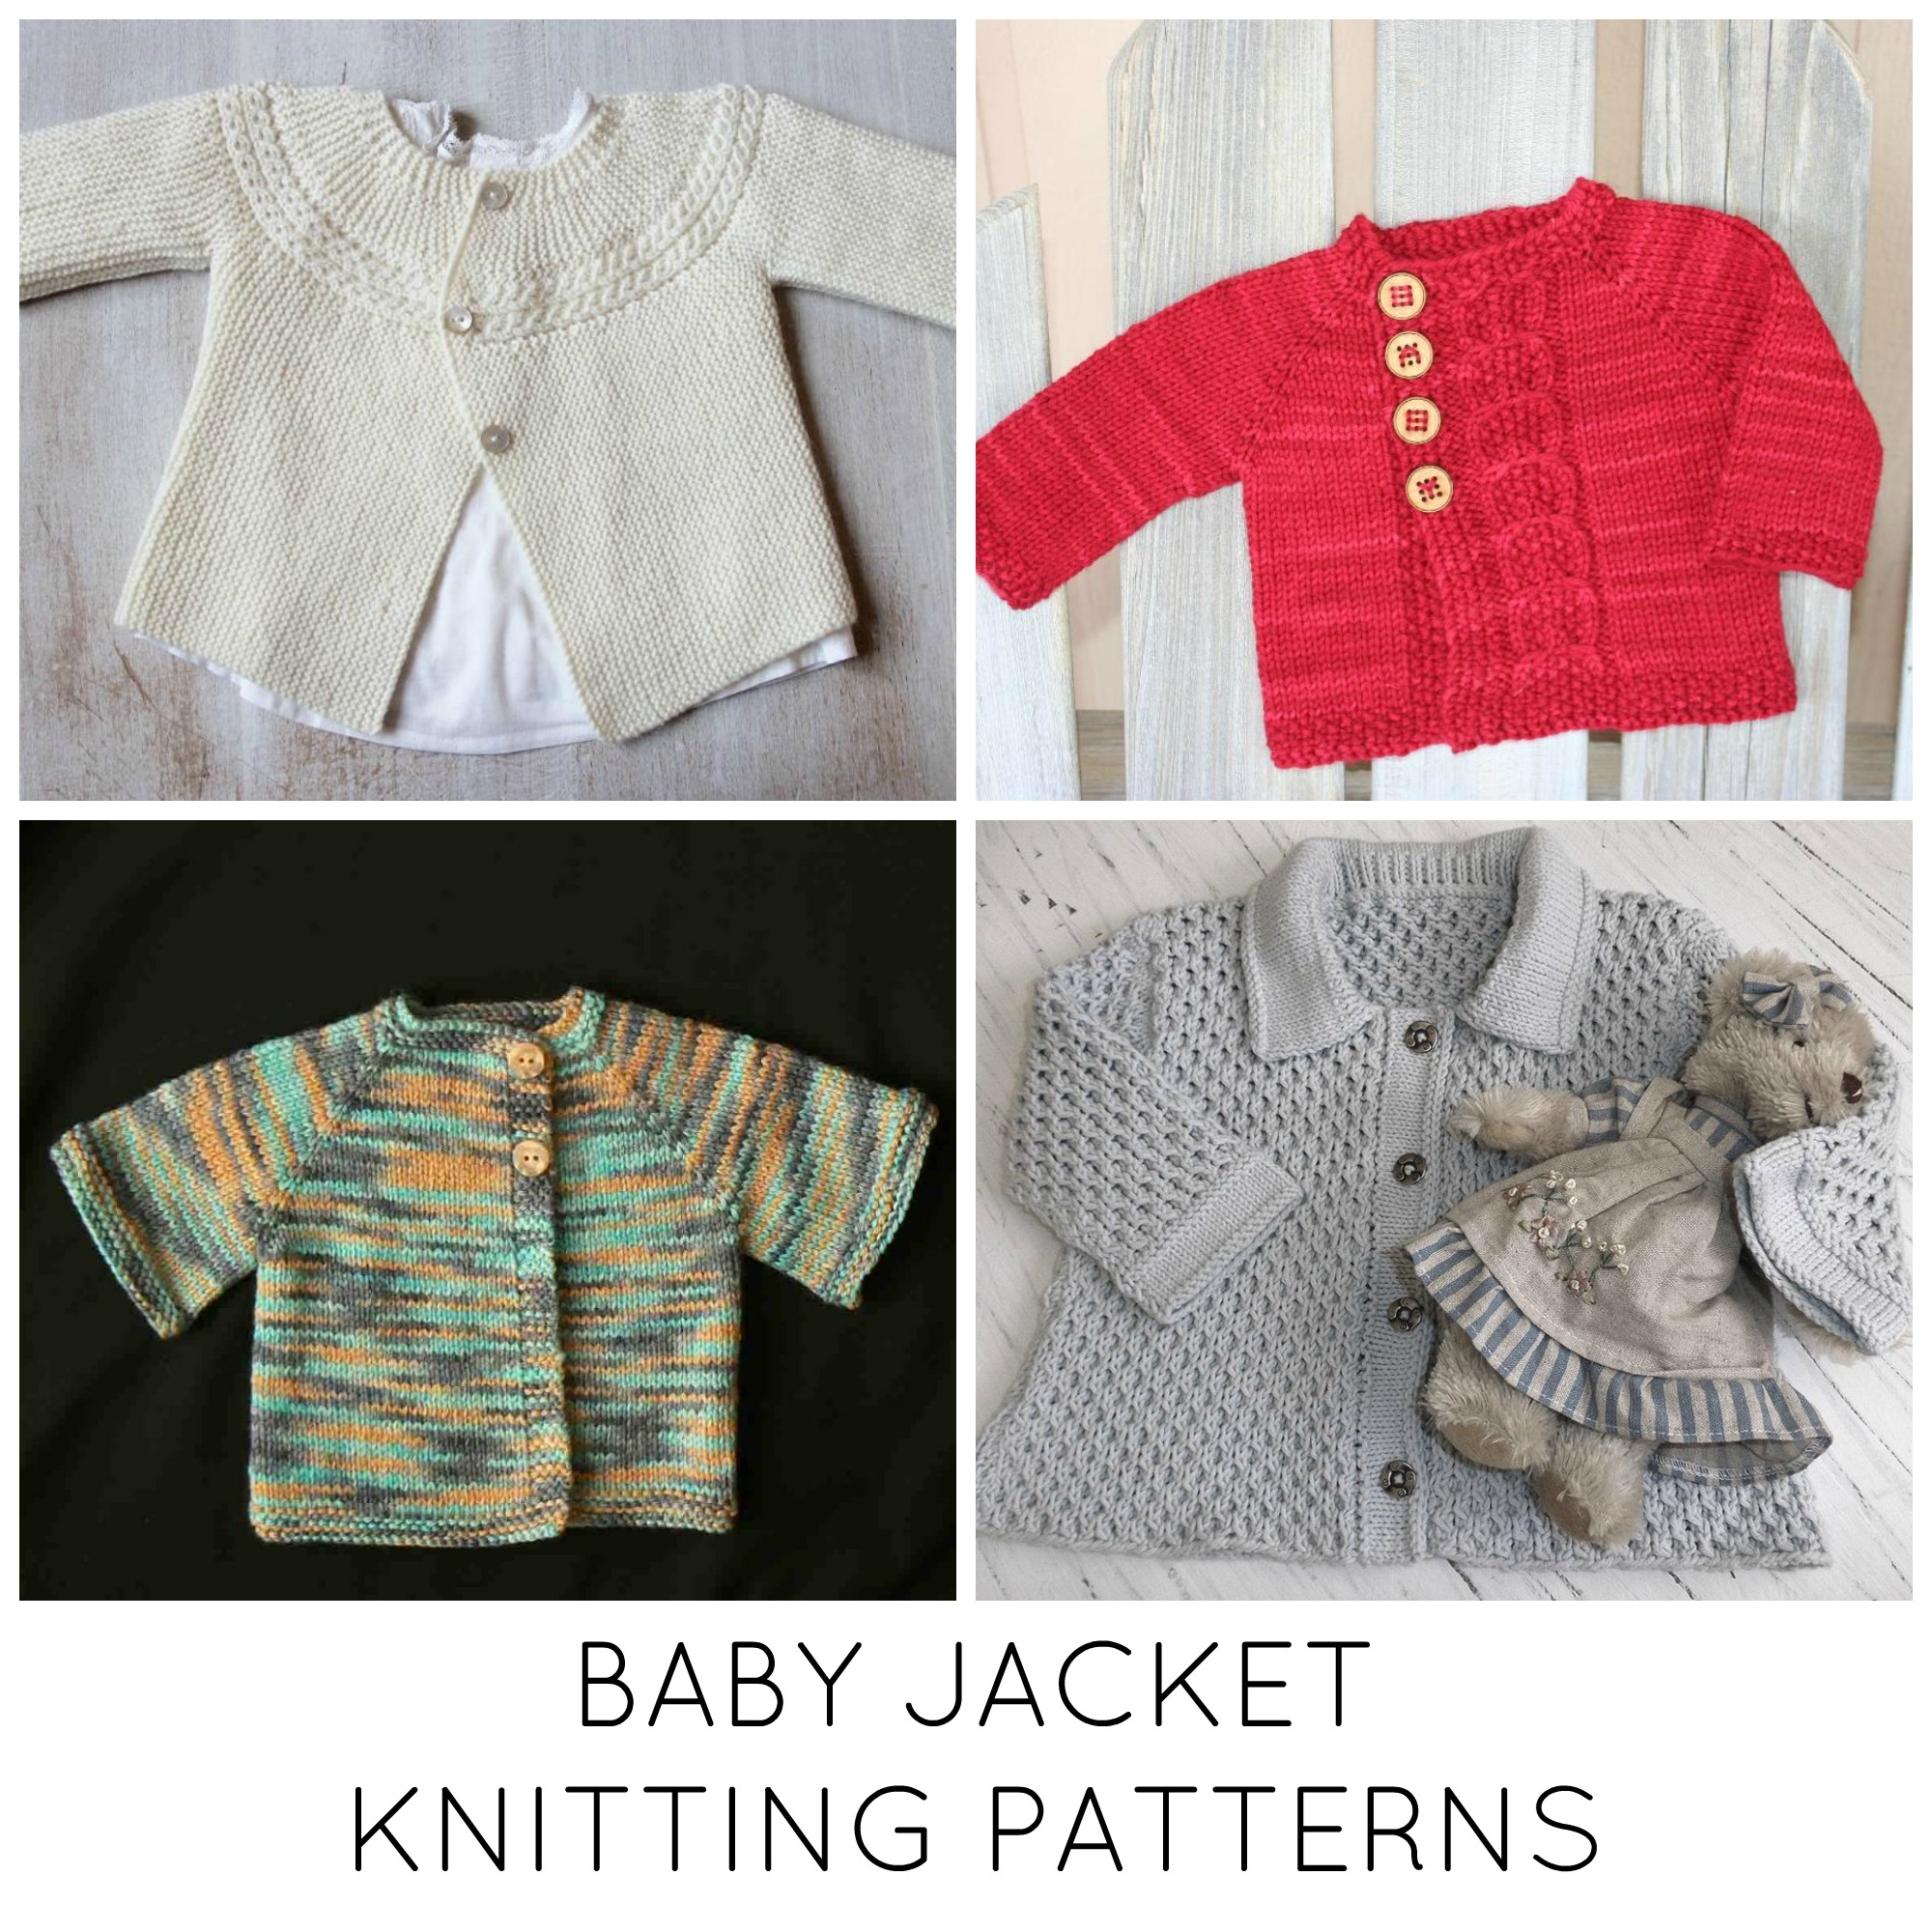 Knitted Jacket Patterns Free Our Favorite Free Ba Sweater Knitting Patterns